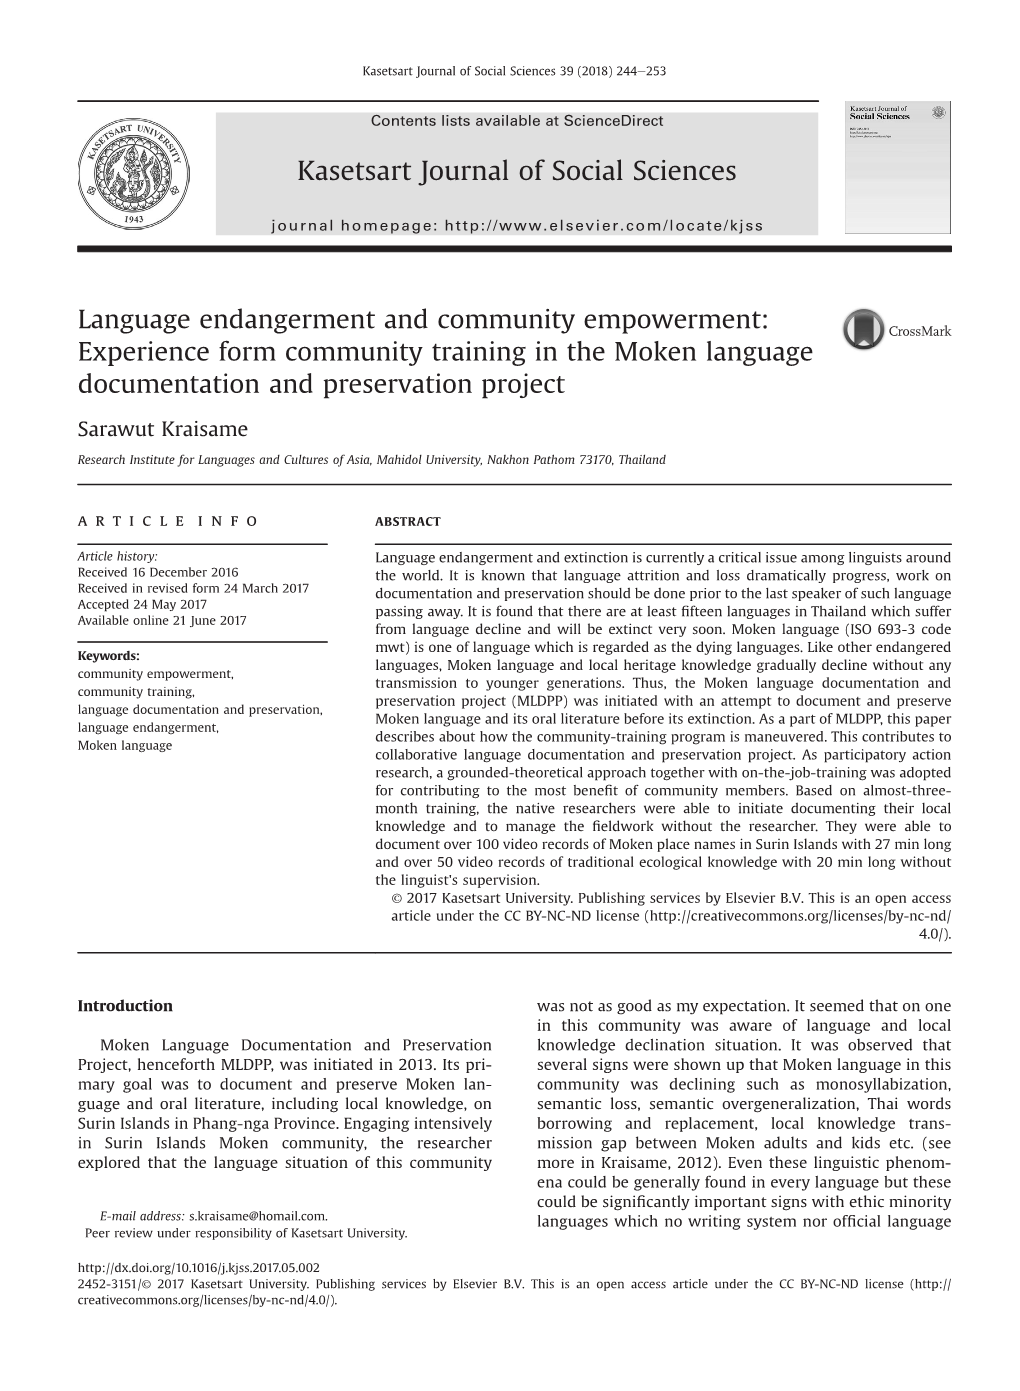 Experience Form Community Training in the Moken Language Documentation and Preservation Project